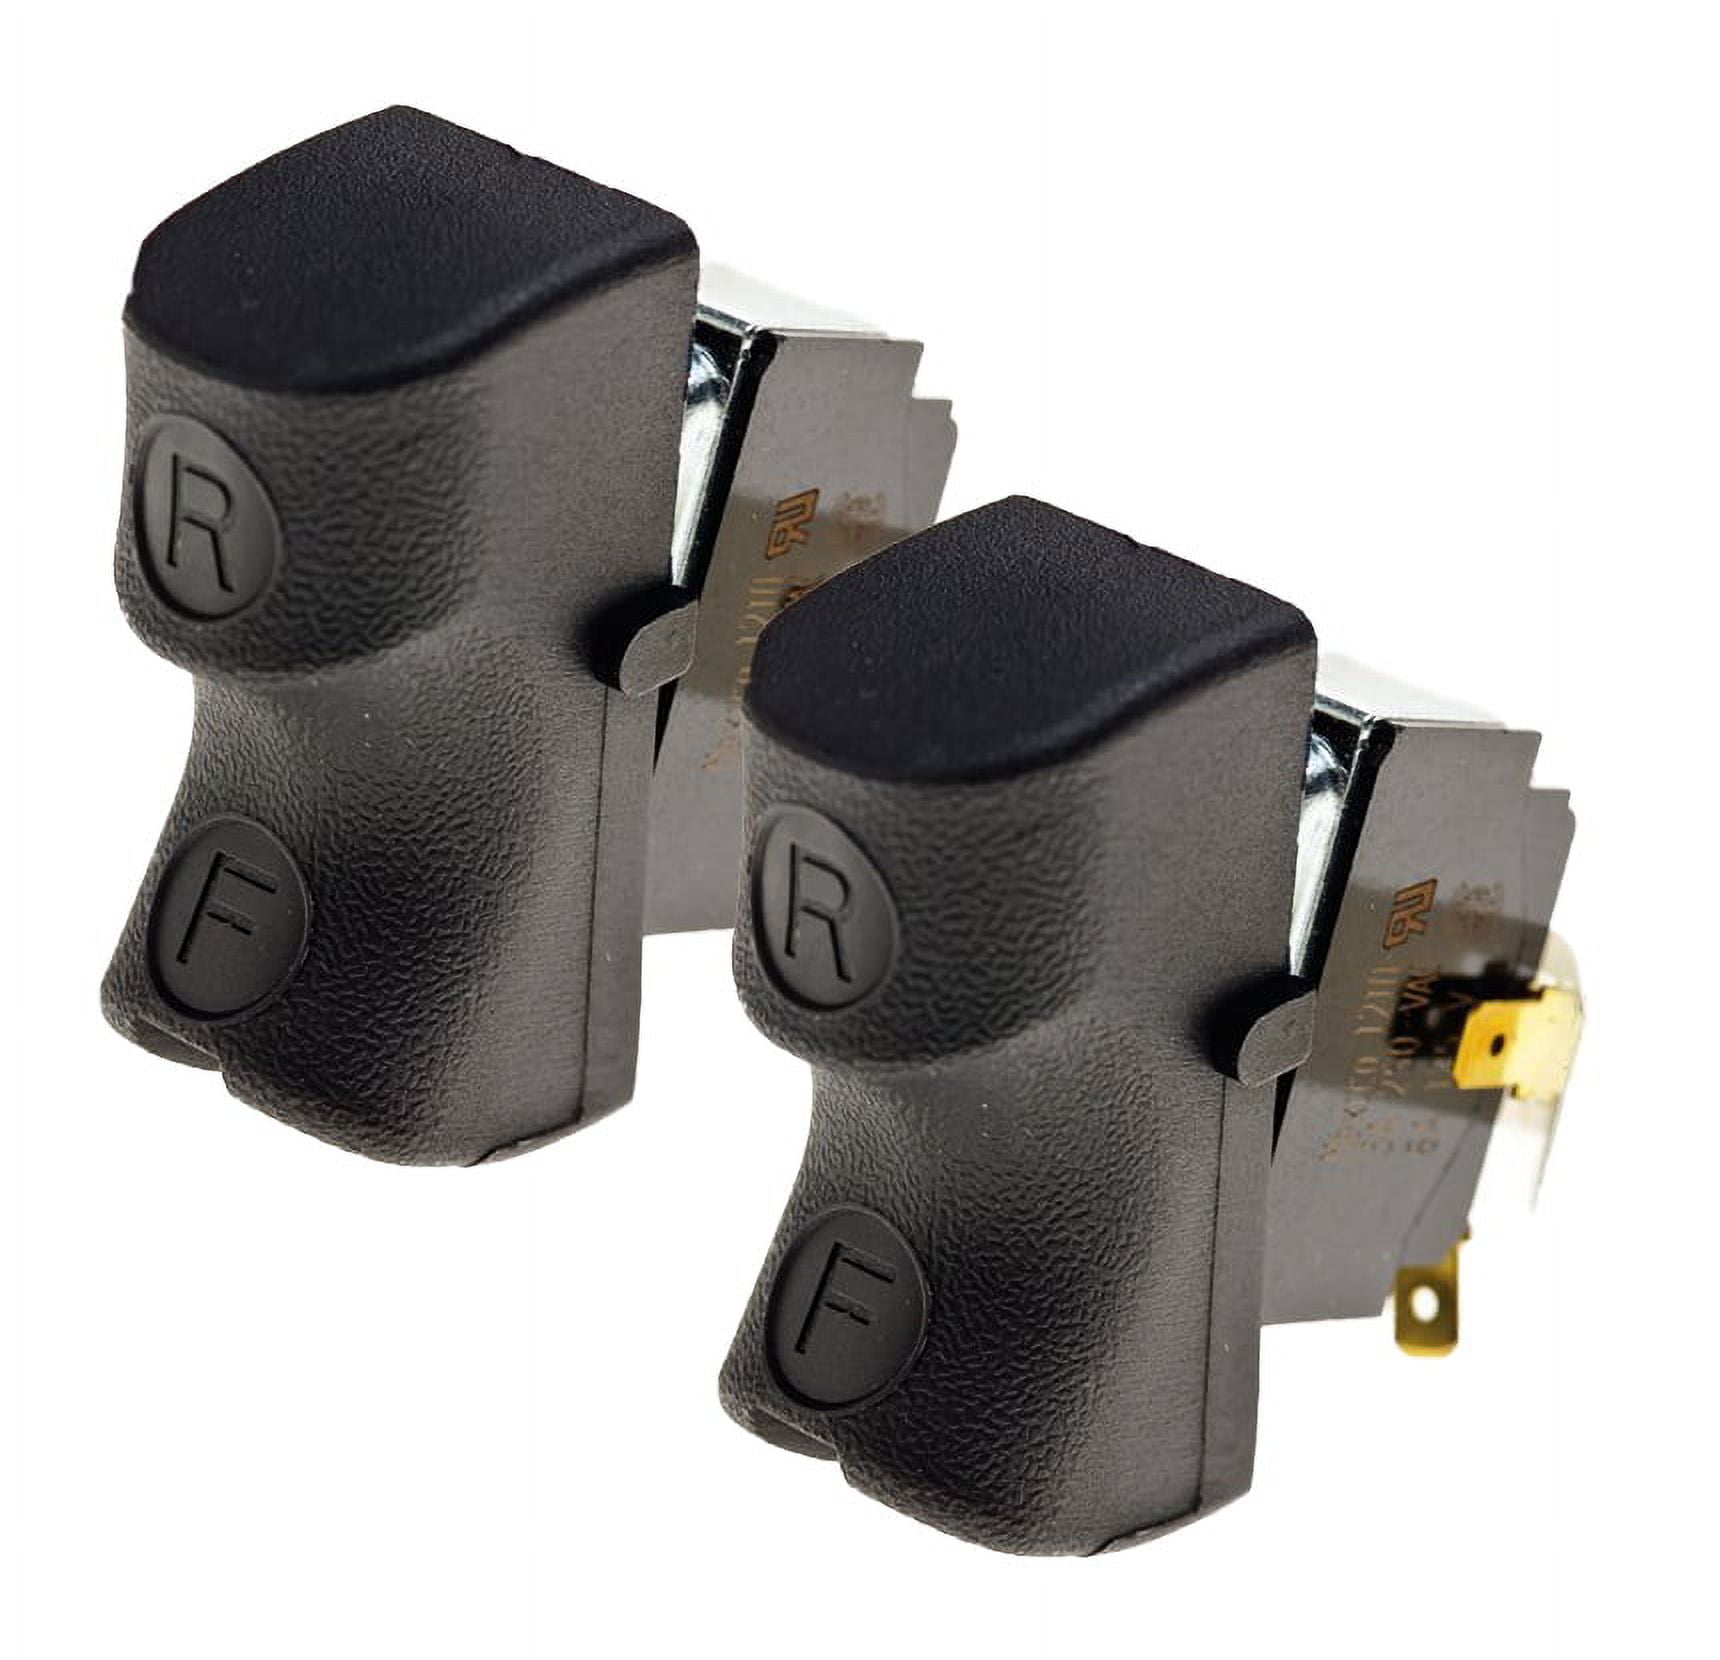 DeWalt DW130 Drill (2 Pack) Replacement Trigger Switch # 449524-00-2PK